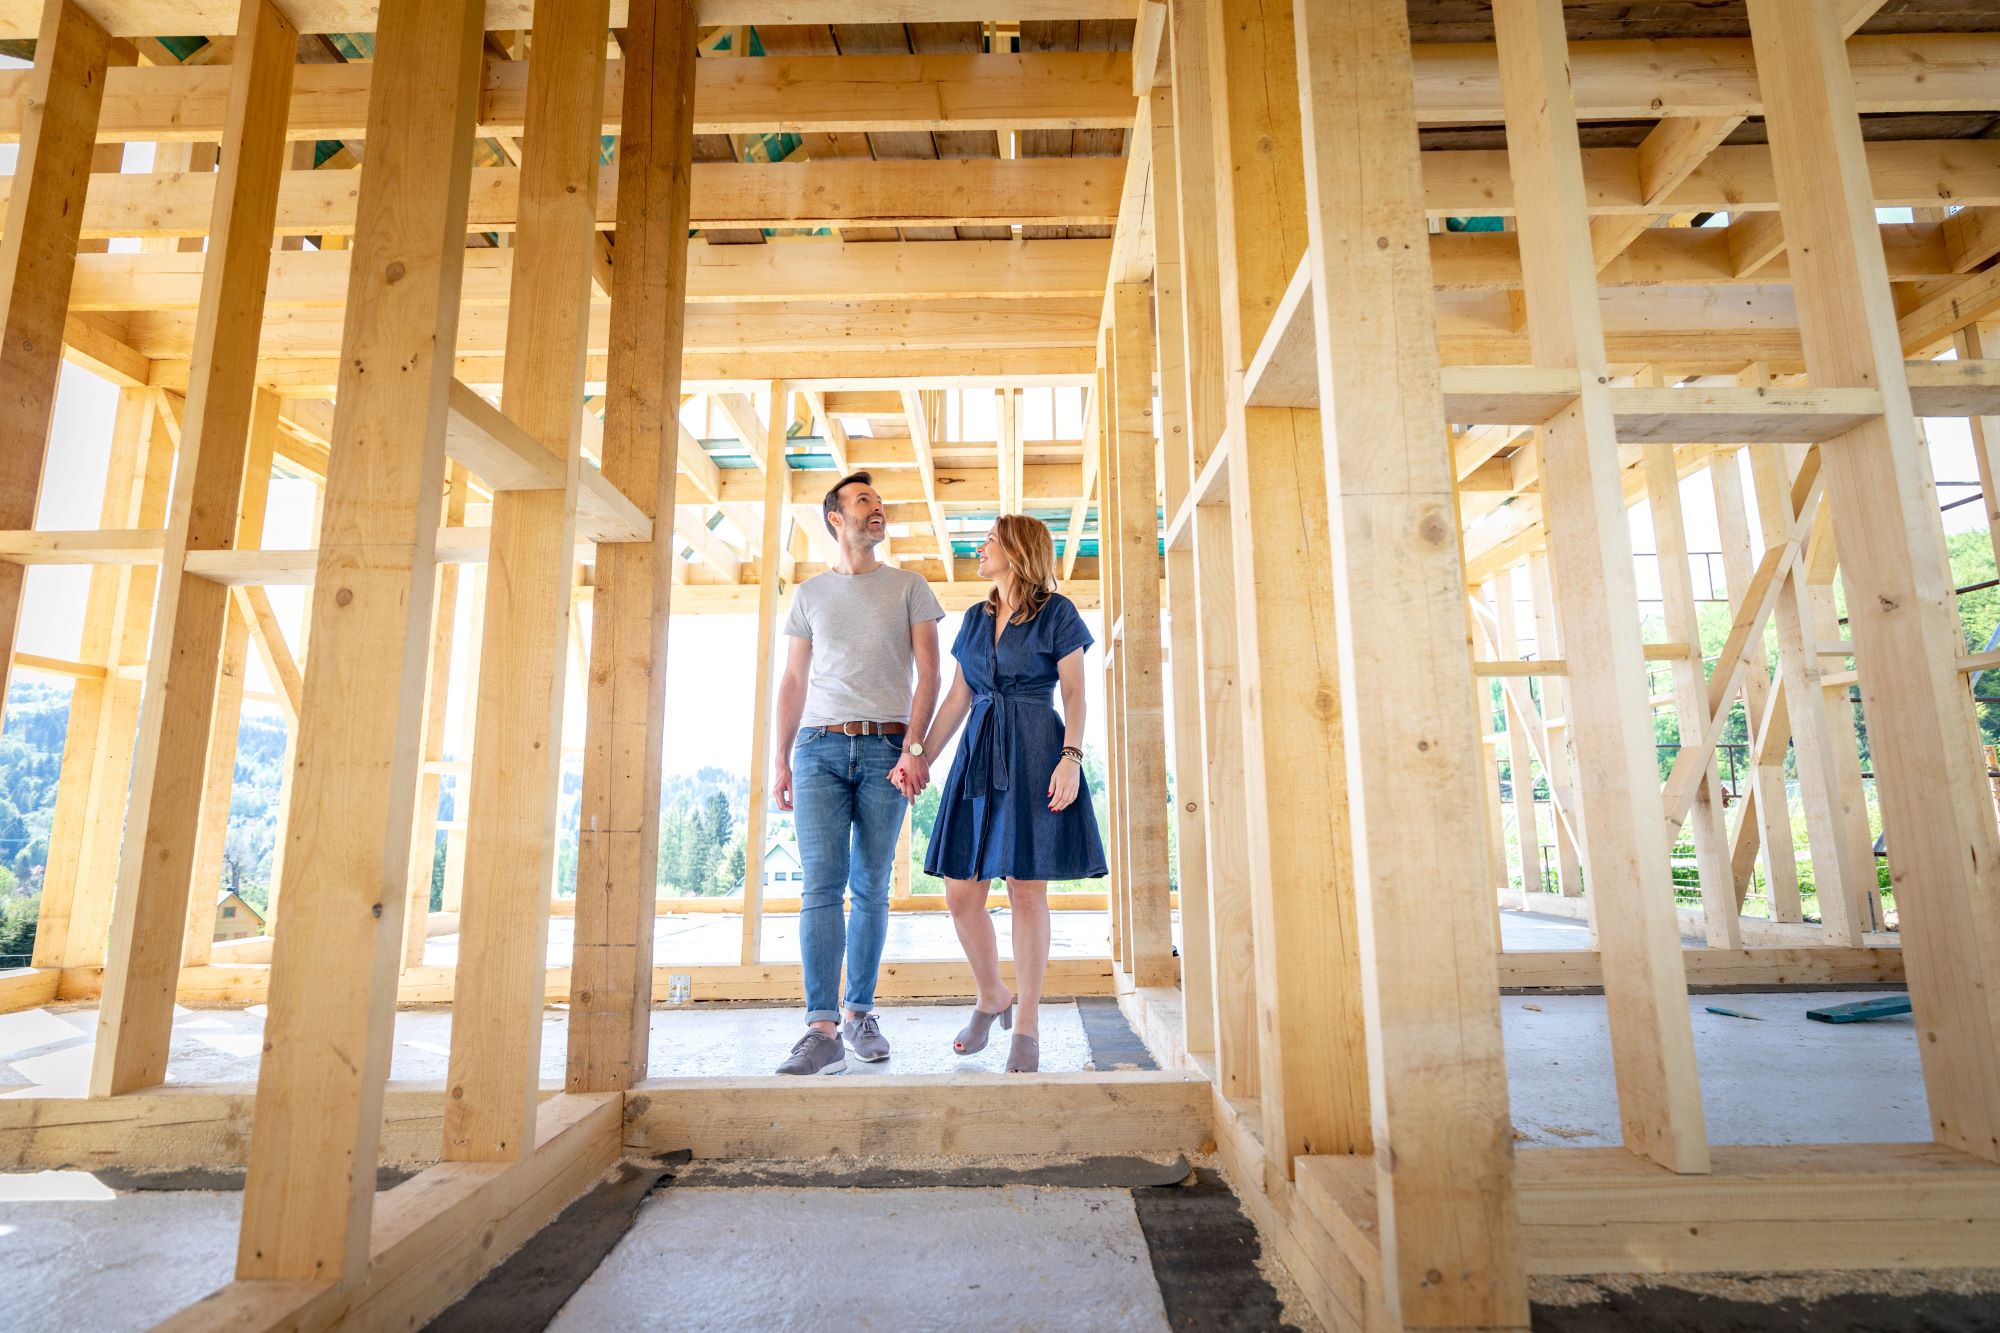 Couple at dream home construction site.